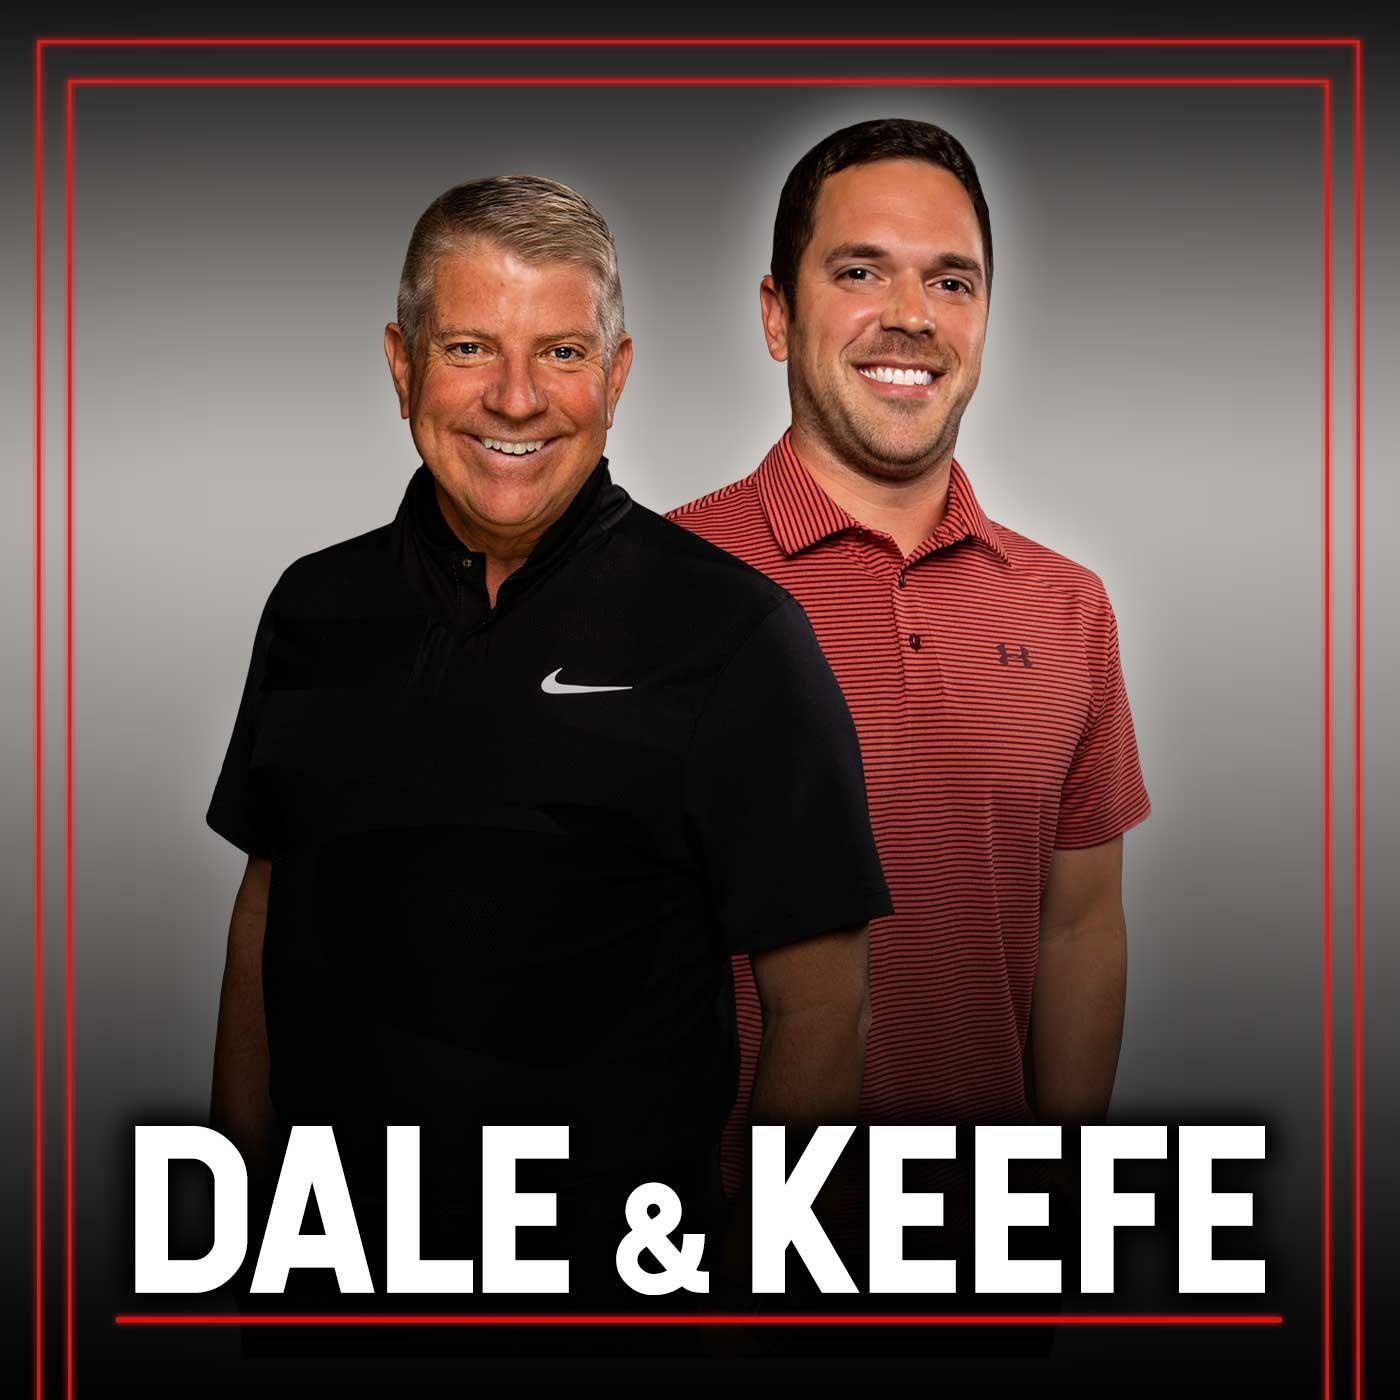 Dale & Keefe - Why the Super Bowl wasn't such a defensive battle; Dale is currently the walking plague